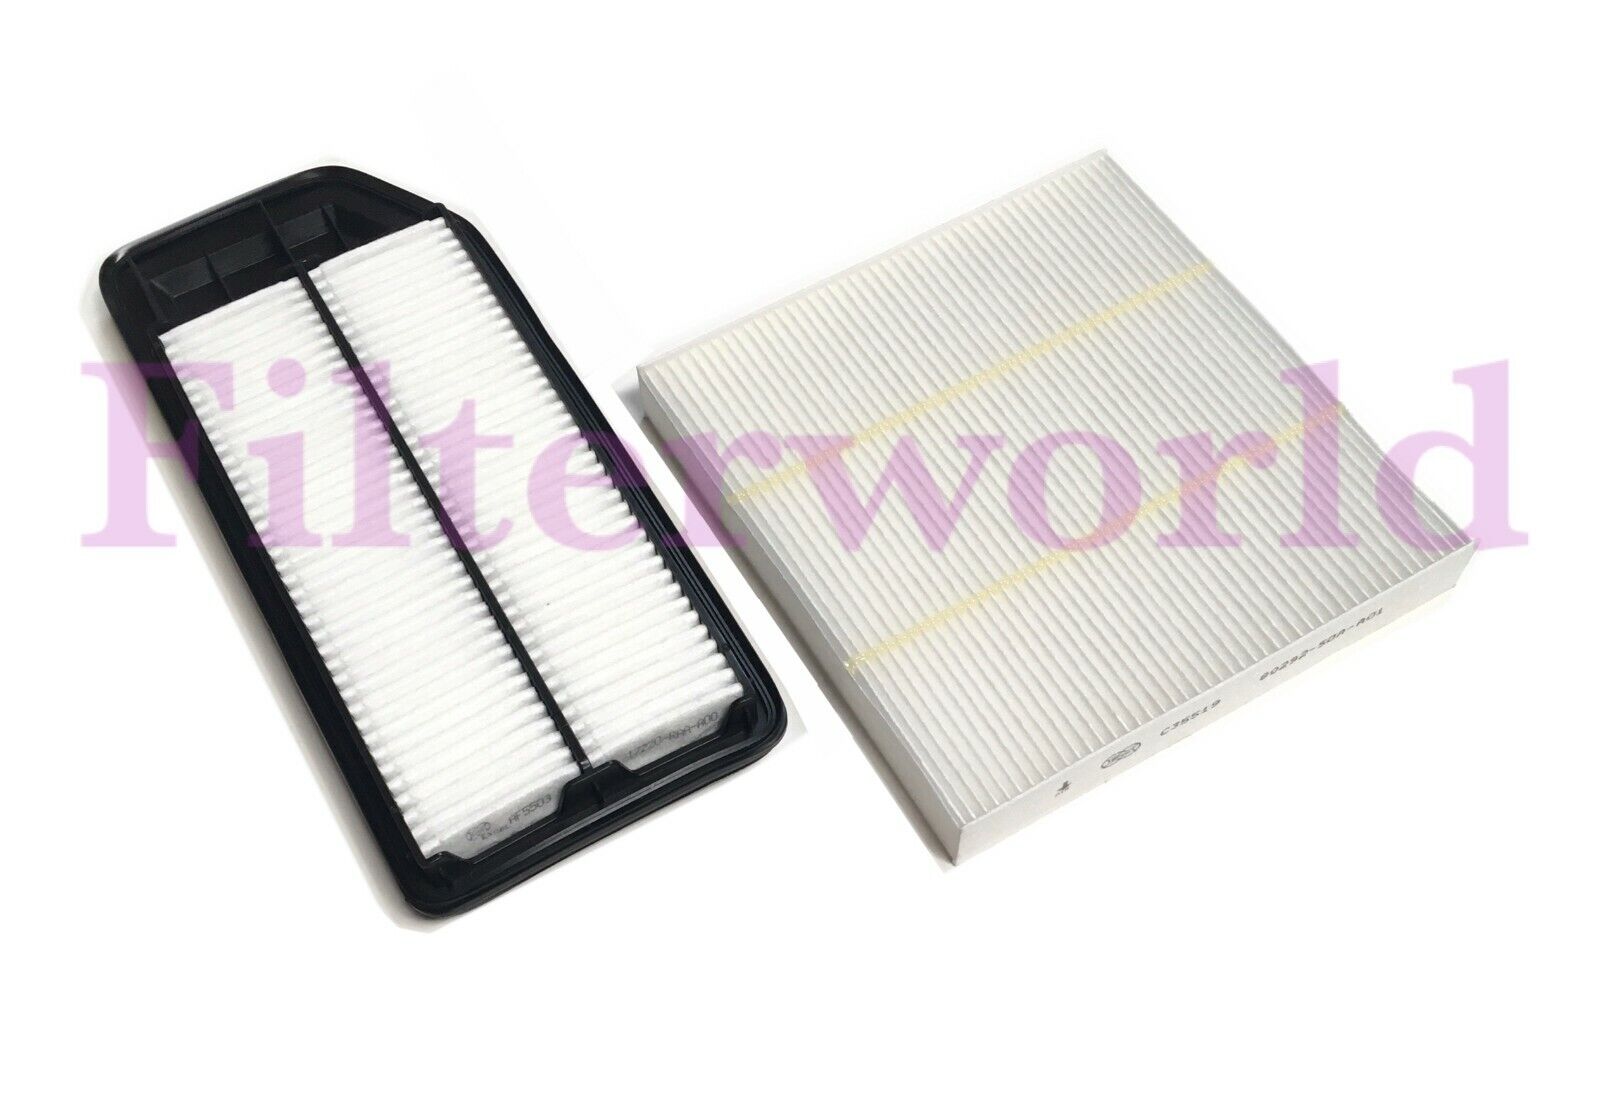 Engine + Cabin Air Filter For 04-08 Acura TSX 03-07 Honda Accord 4cyl US Seller 